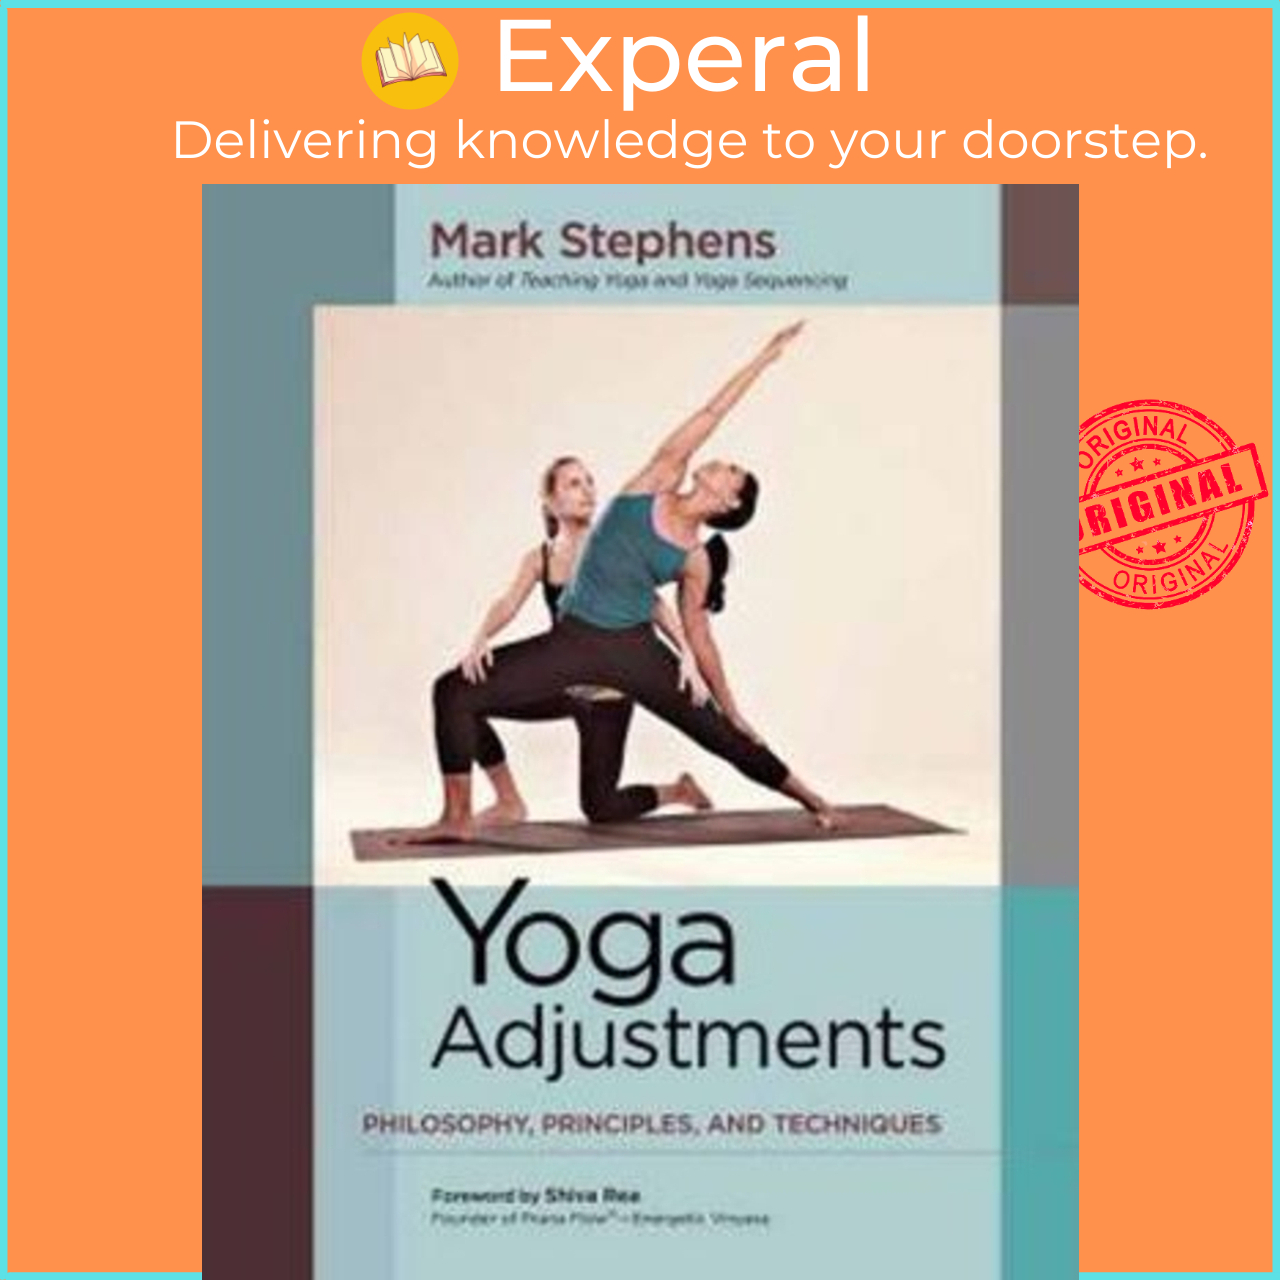 Yoga Adjustments : Philosophy, Principles, and Techniques by Mark